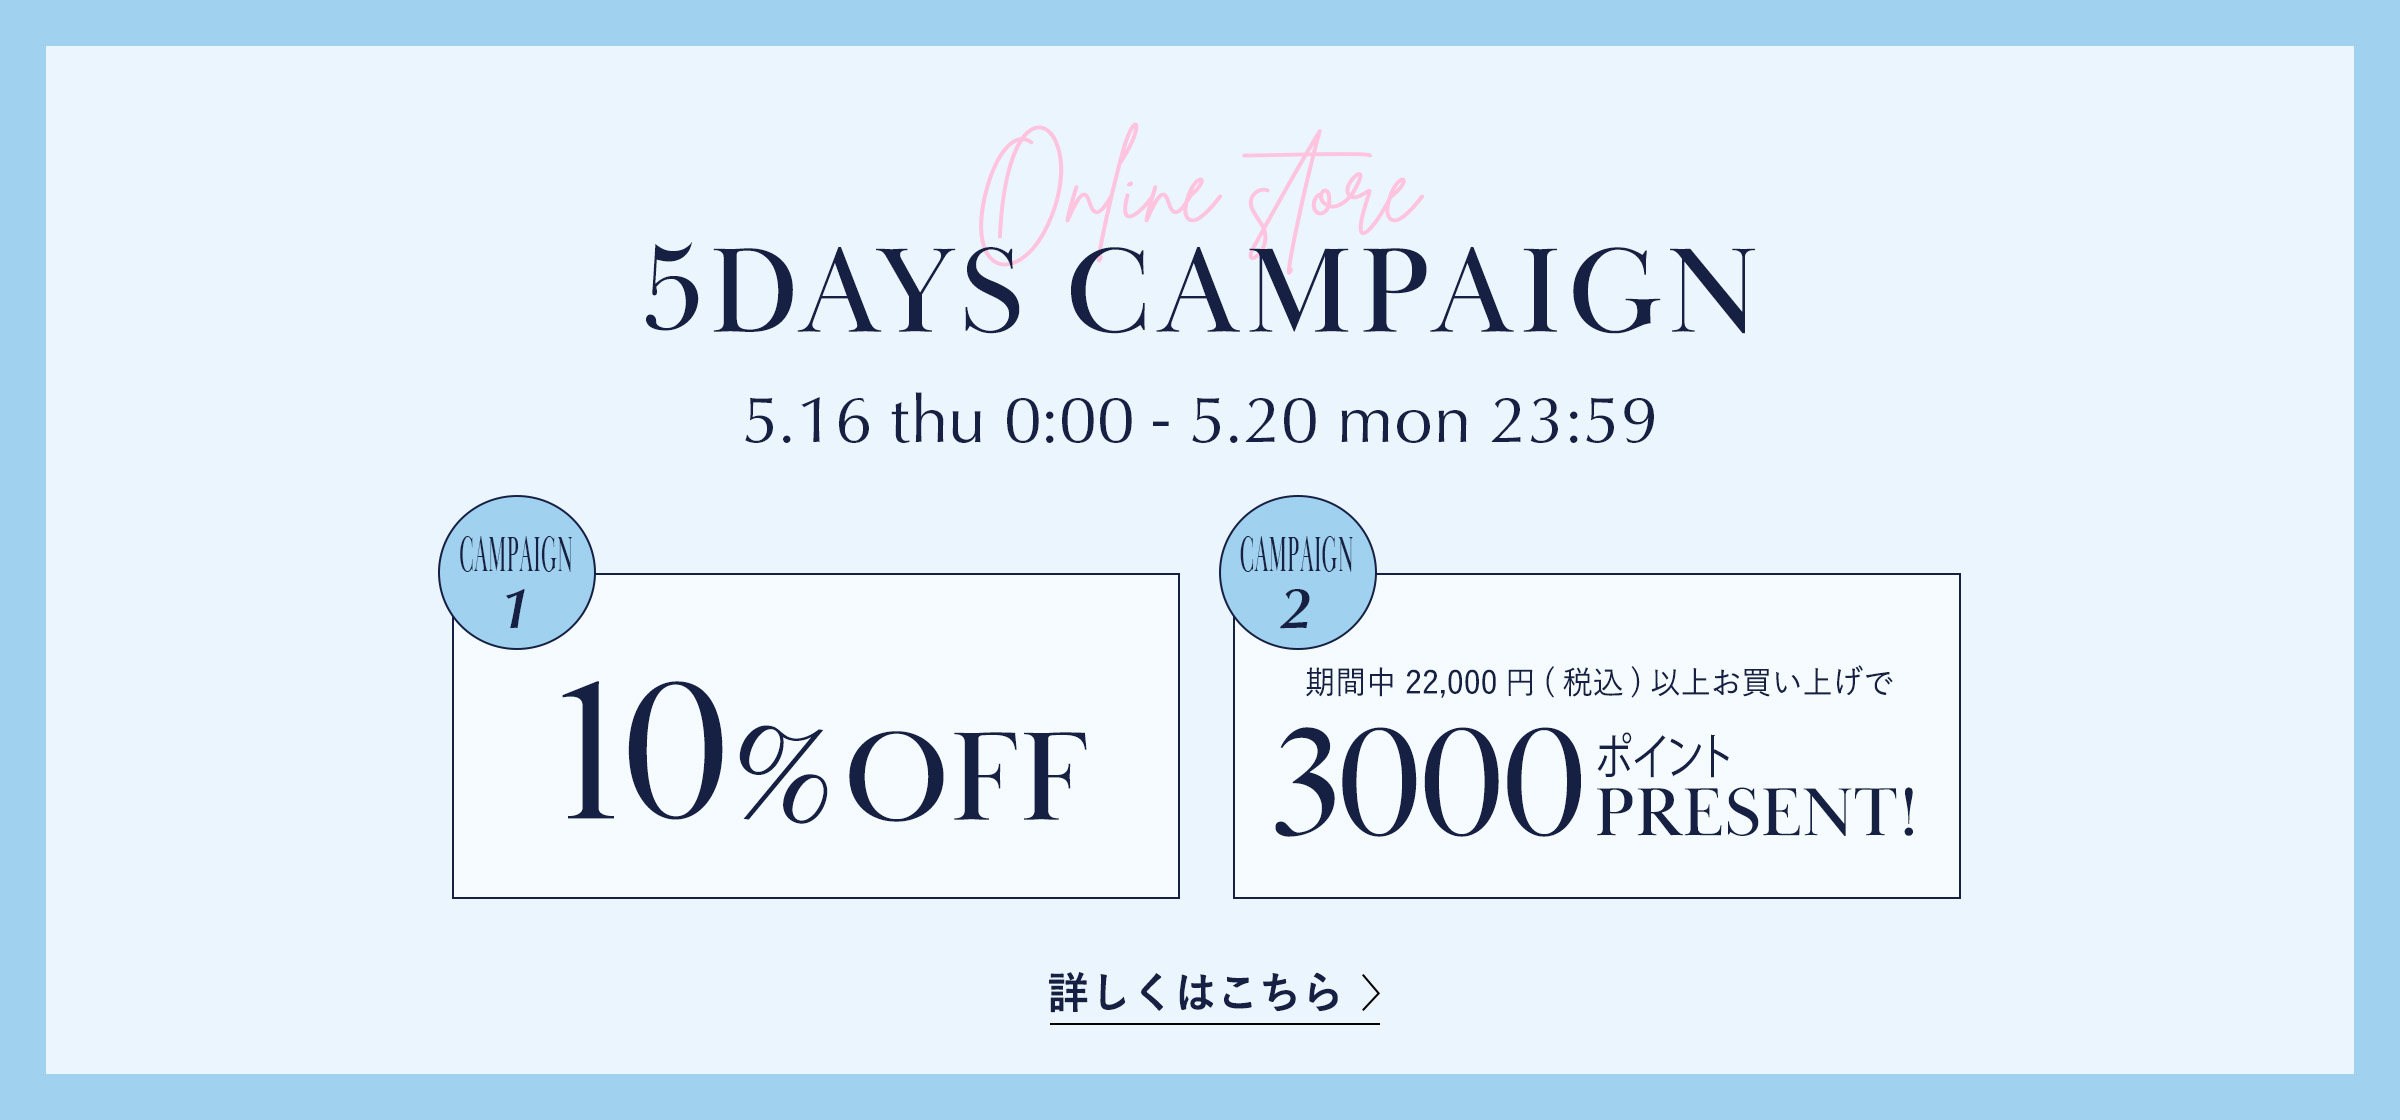 5DAYS CAMPAIGN